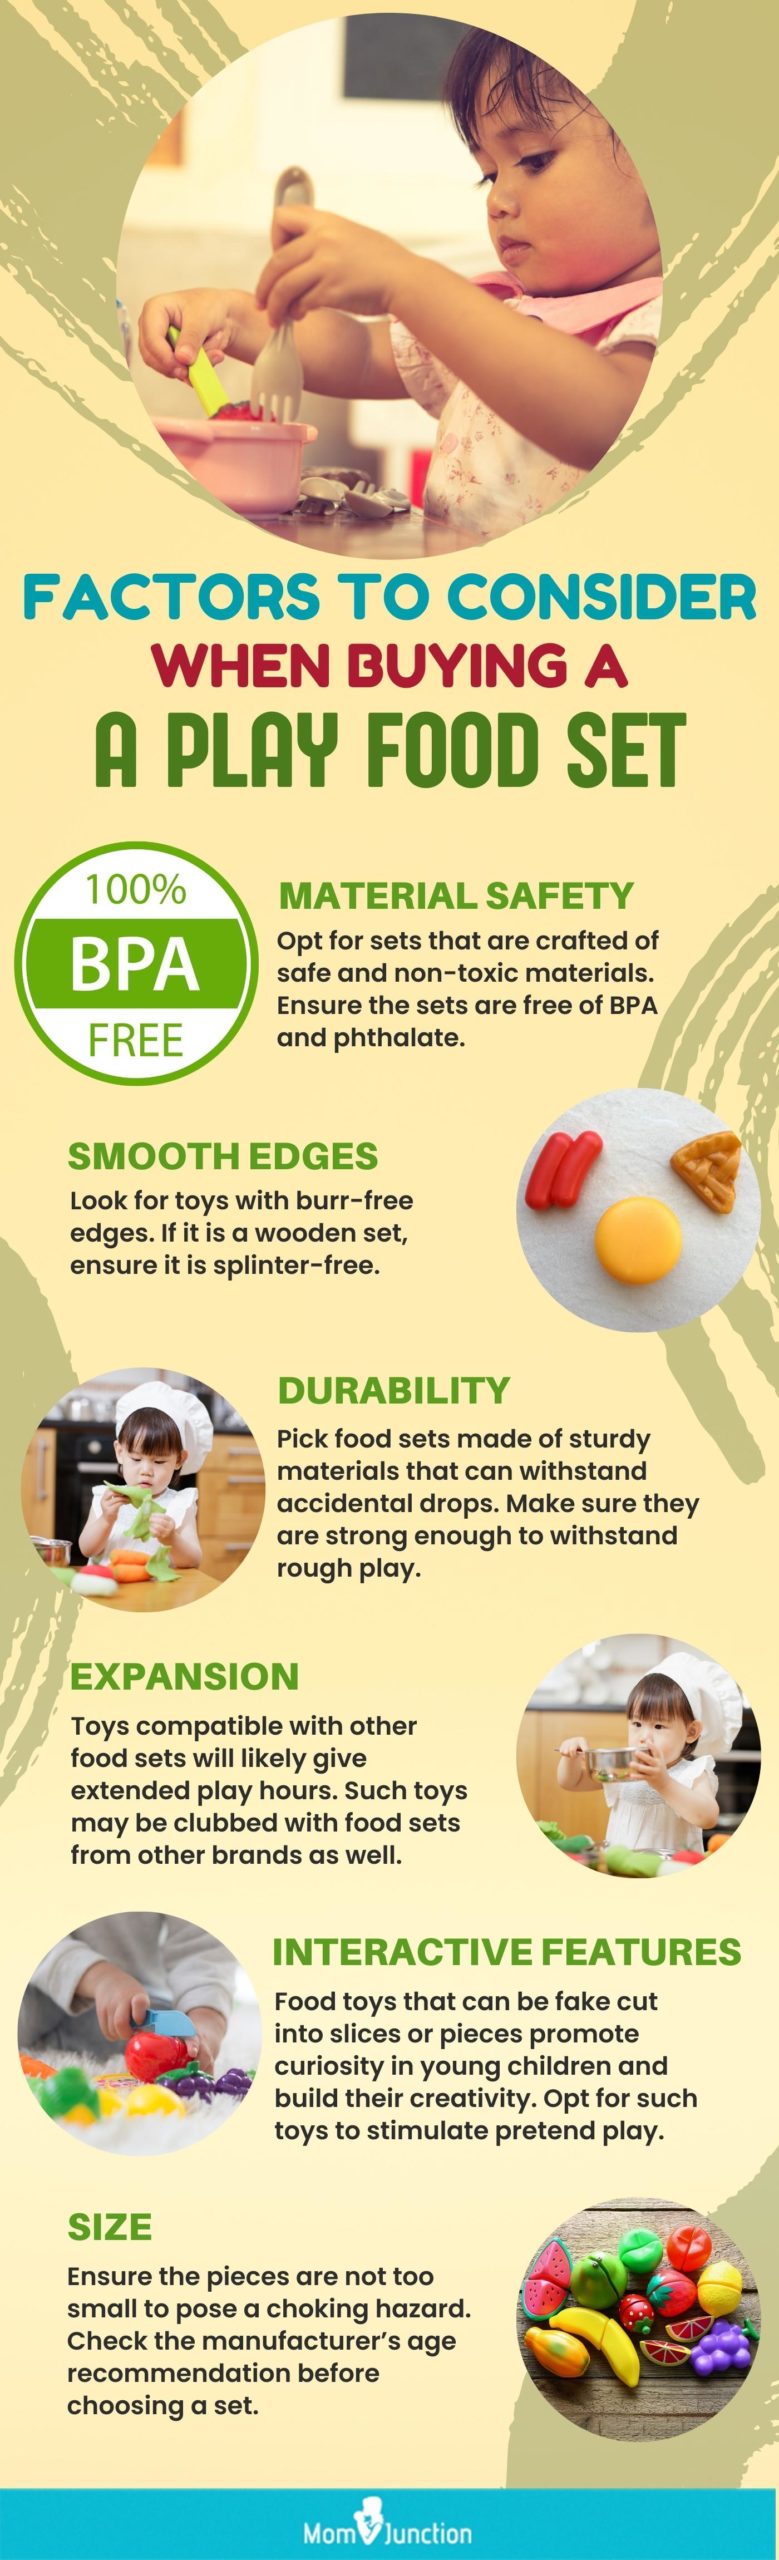 Factors To Consider When Buying A Play Food Set (infographic)